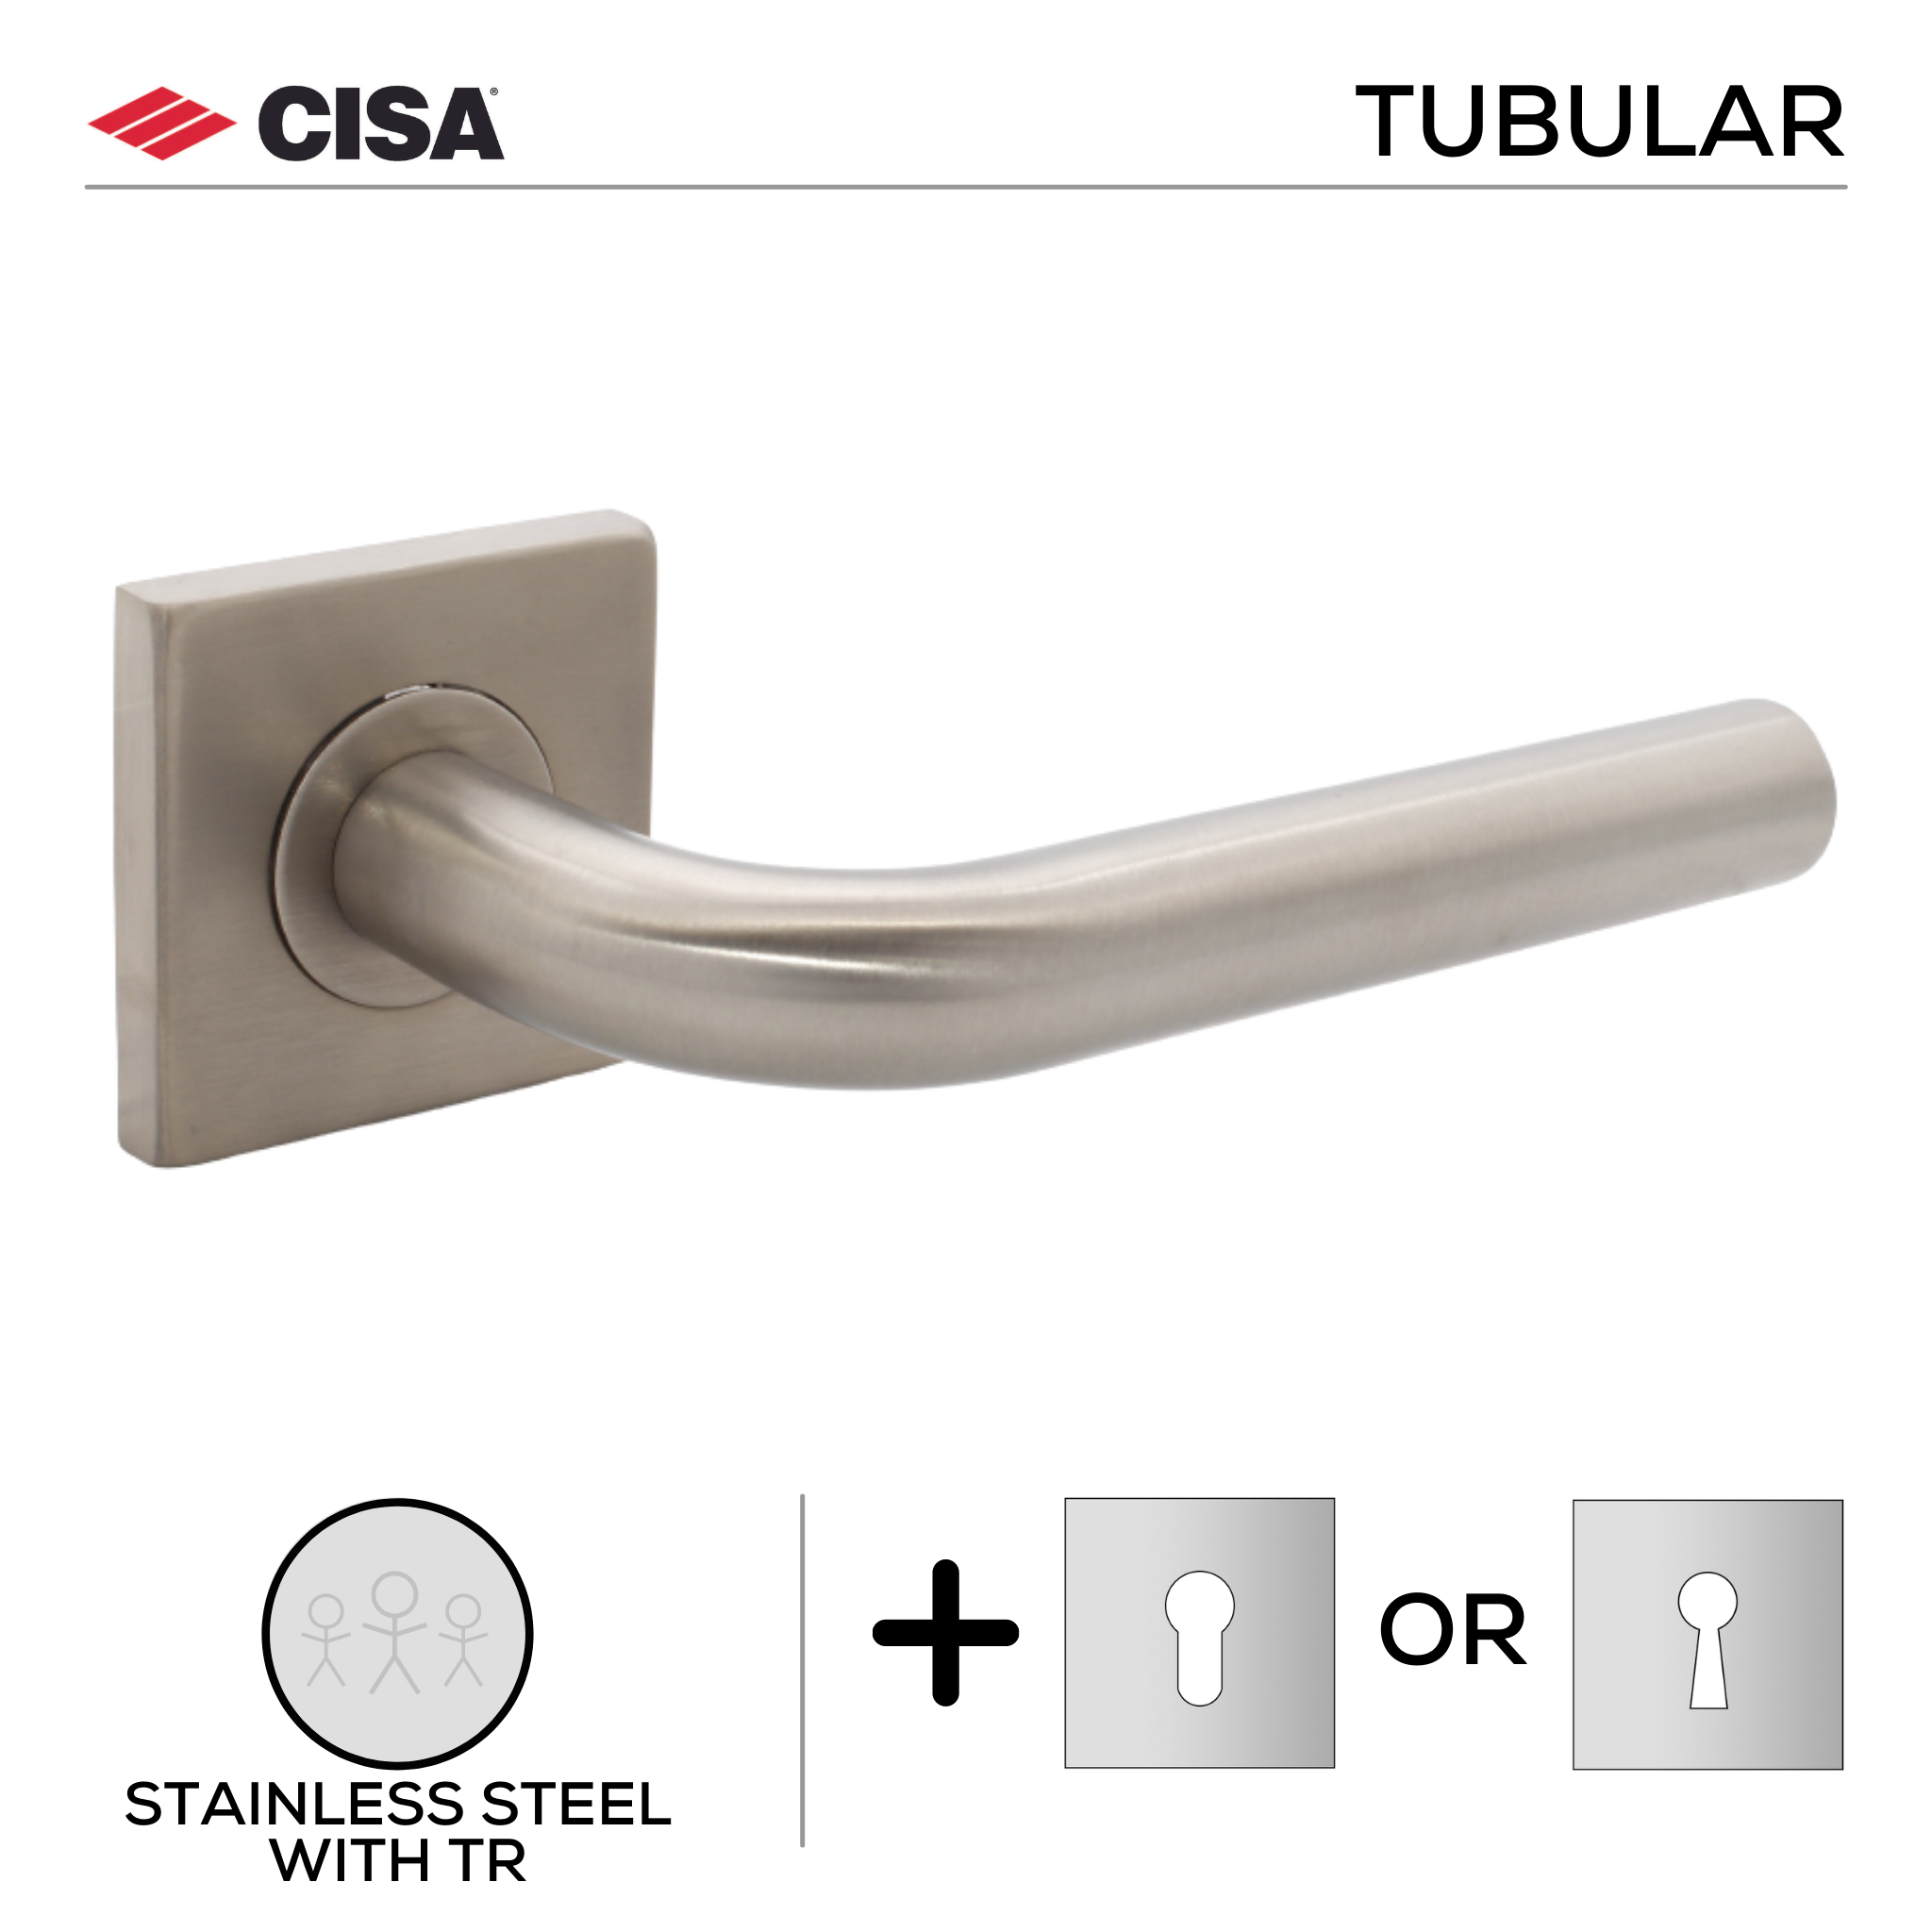 FT01.S._.TR, Lever Handles, Tubular, On Square Rose, With Escutcheons, 134mm (l), Stainless Steel with Tarnish Resistant, CISA